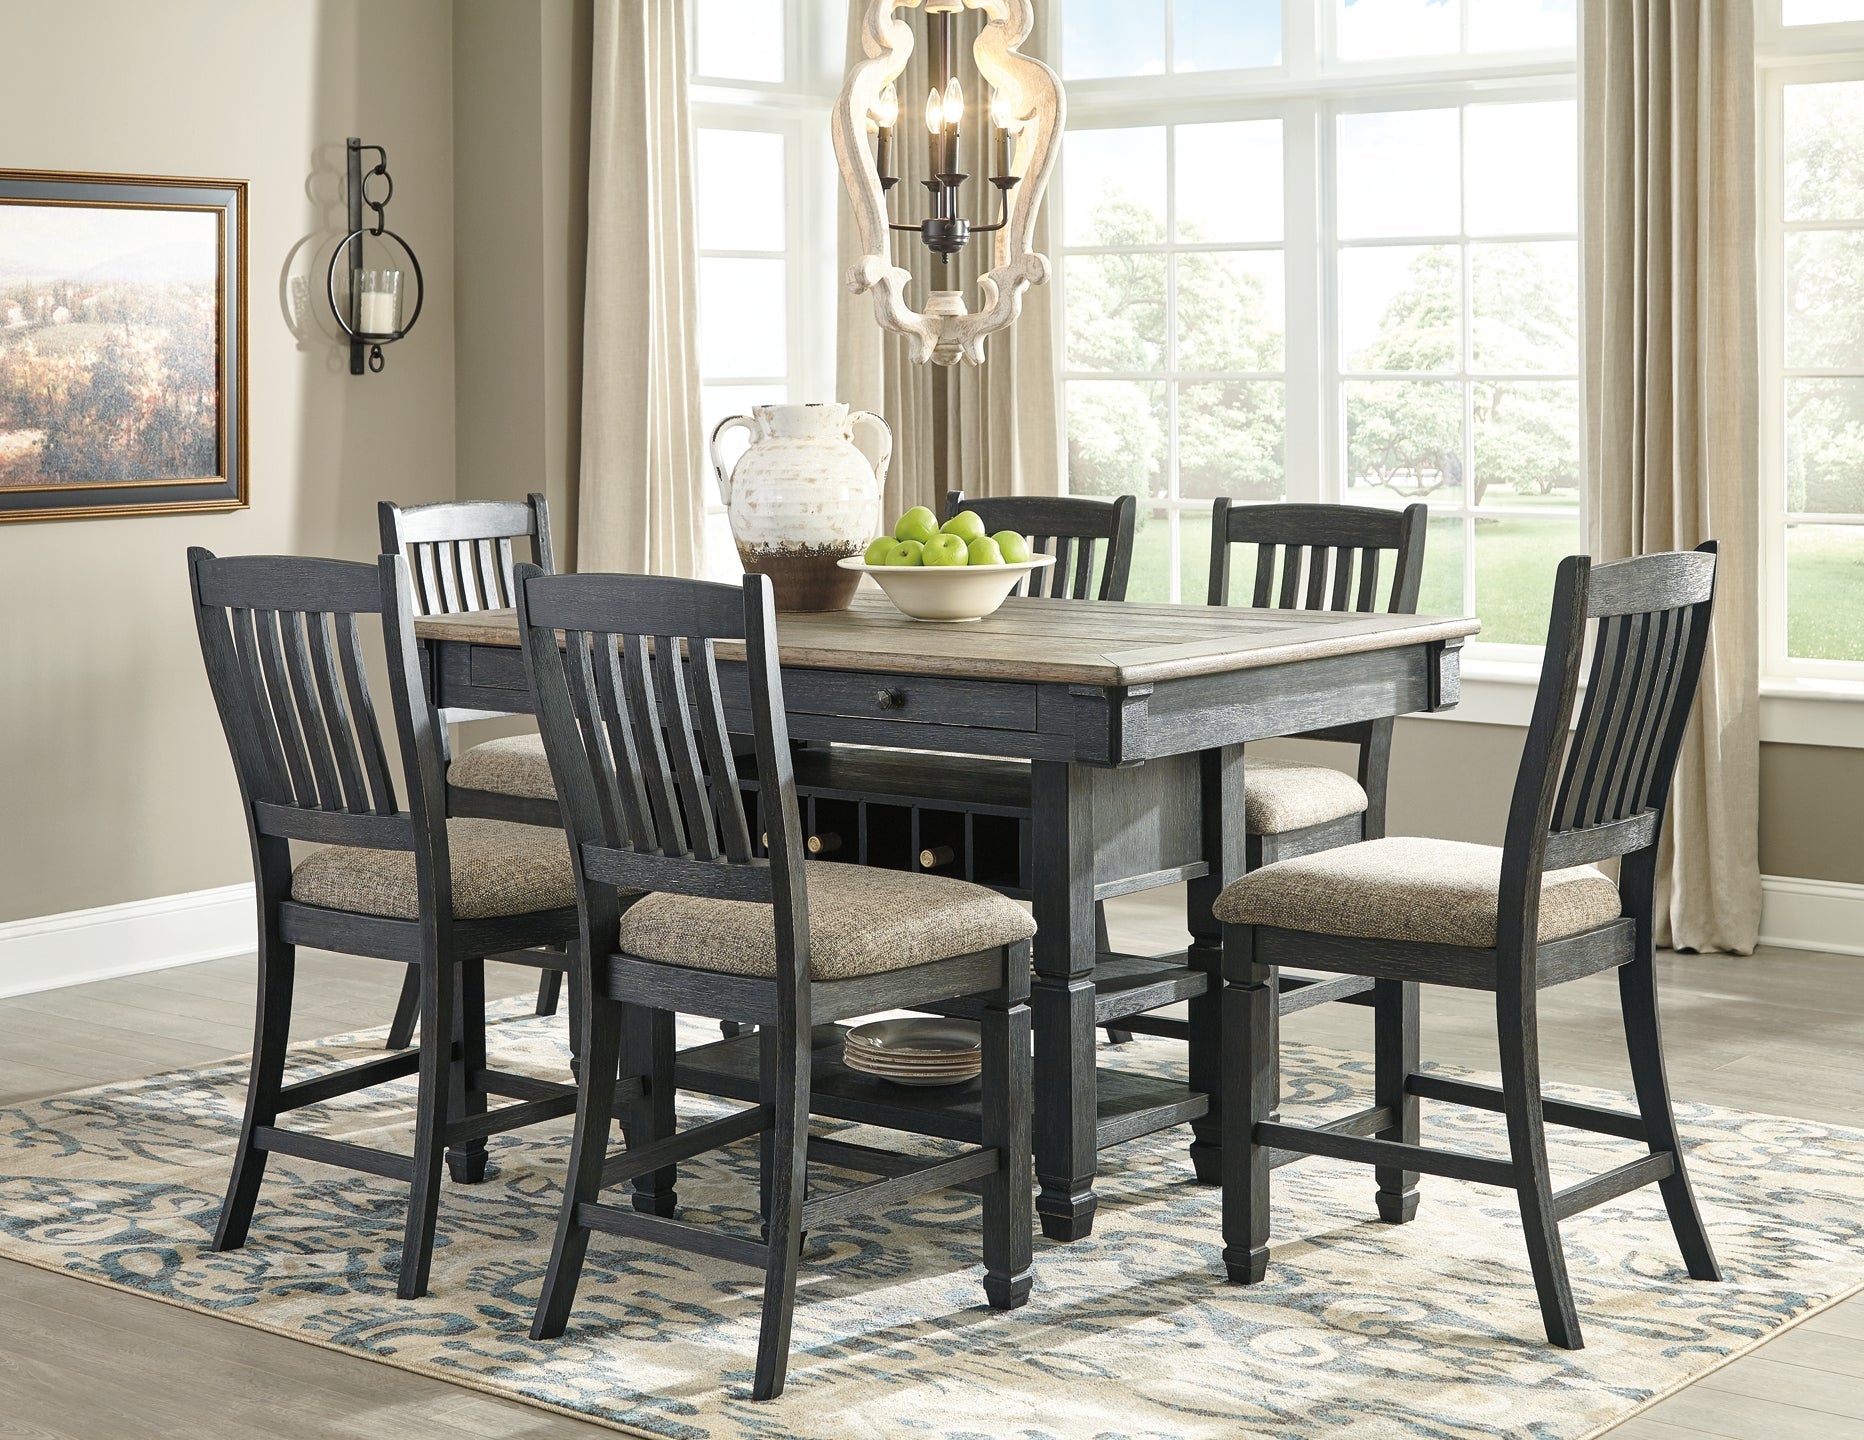 Tyler Creek Counter Height Dining Table and 6 Barstools at Walker Mattress and Furniture Locations in Cedar Park and Belton TX.